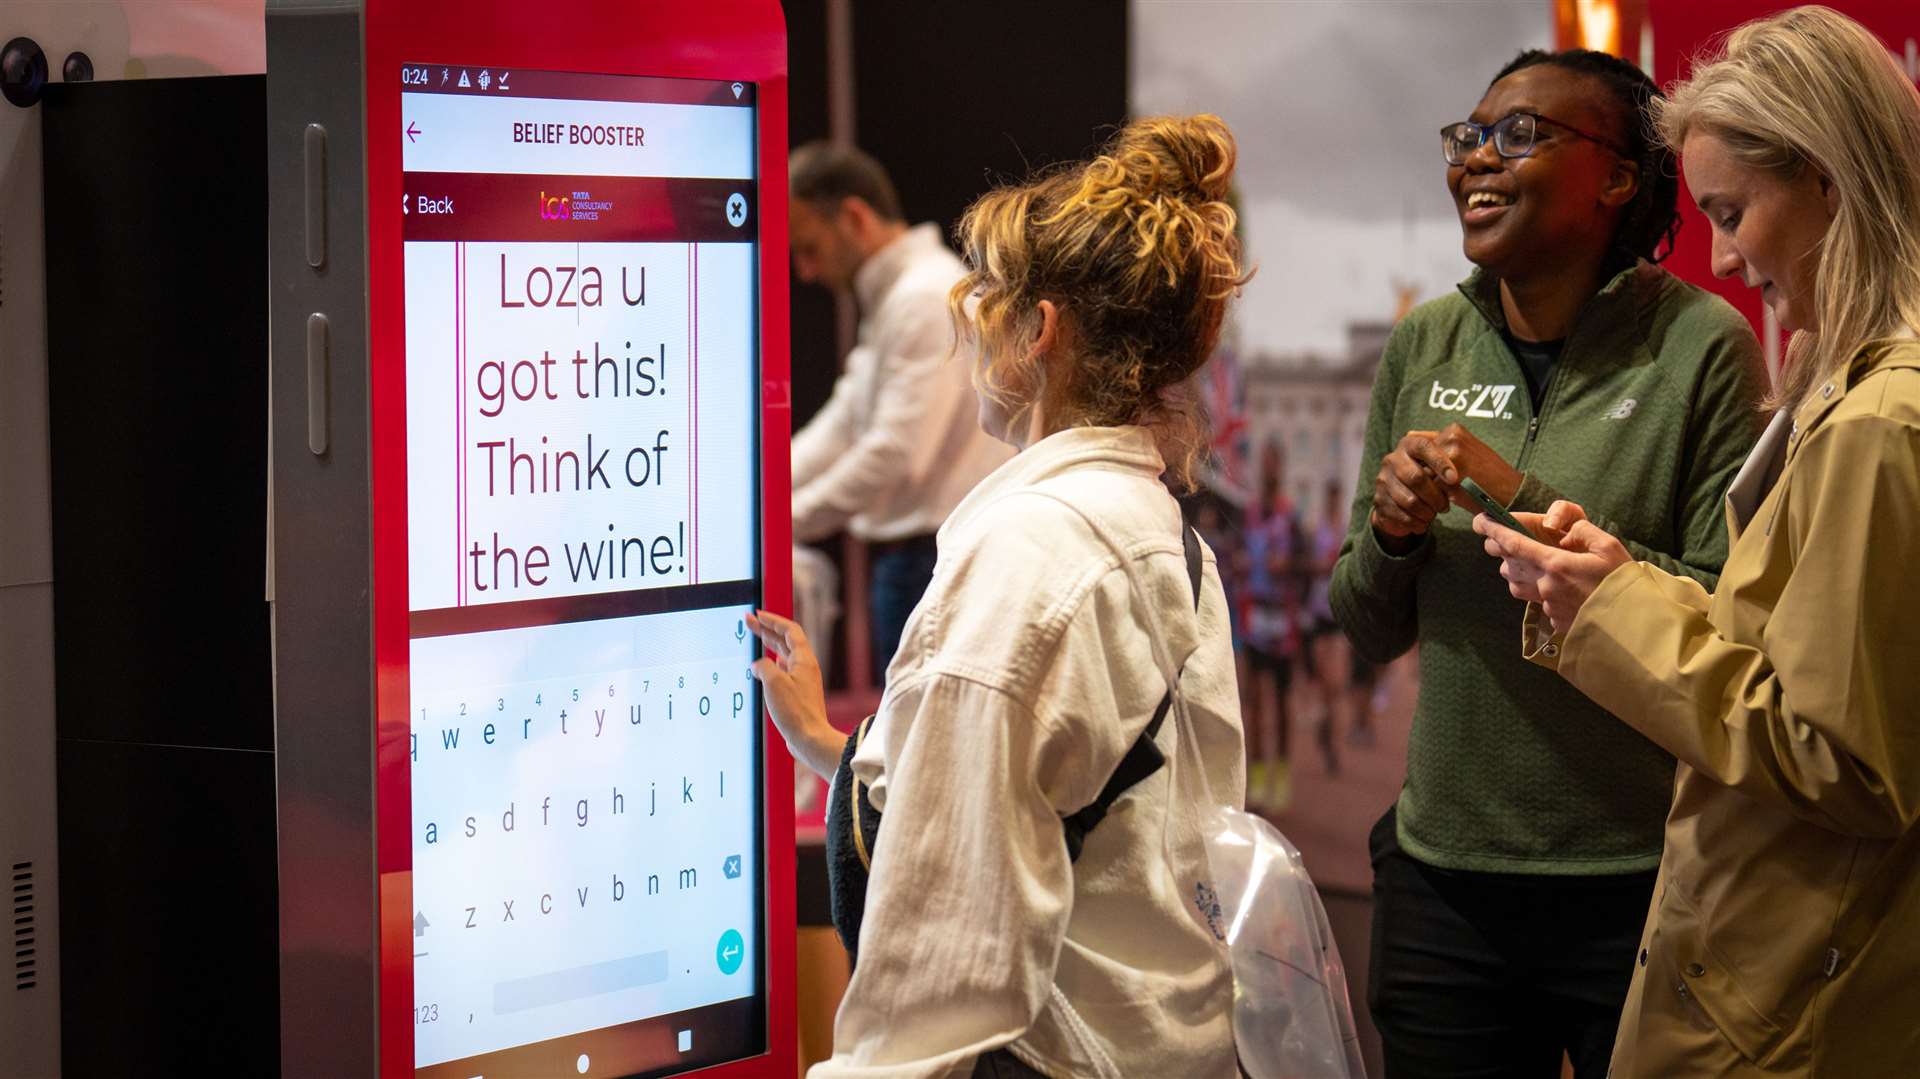 A supporter sends a Belief Booster personal message through the app at the TCS London Marathon running show at ExCel London (TCS/PA)